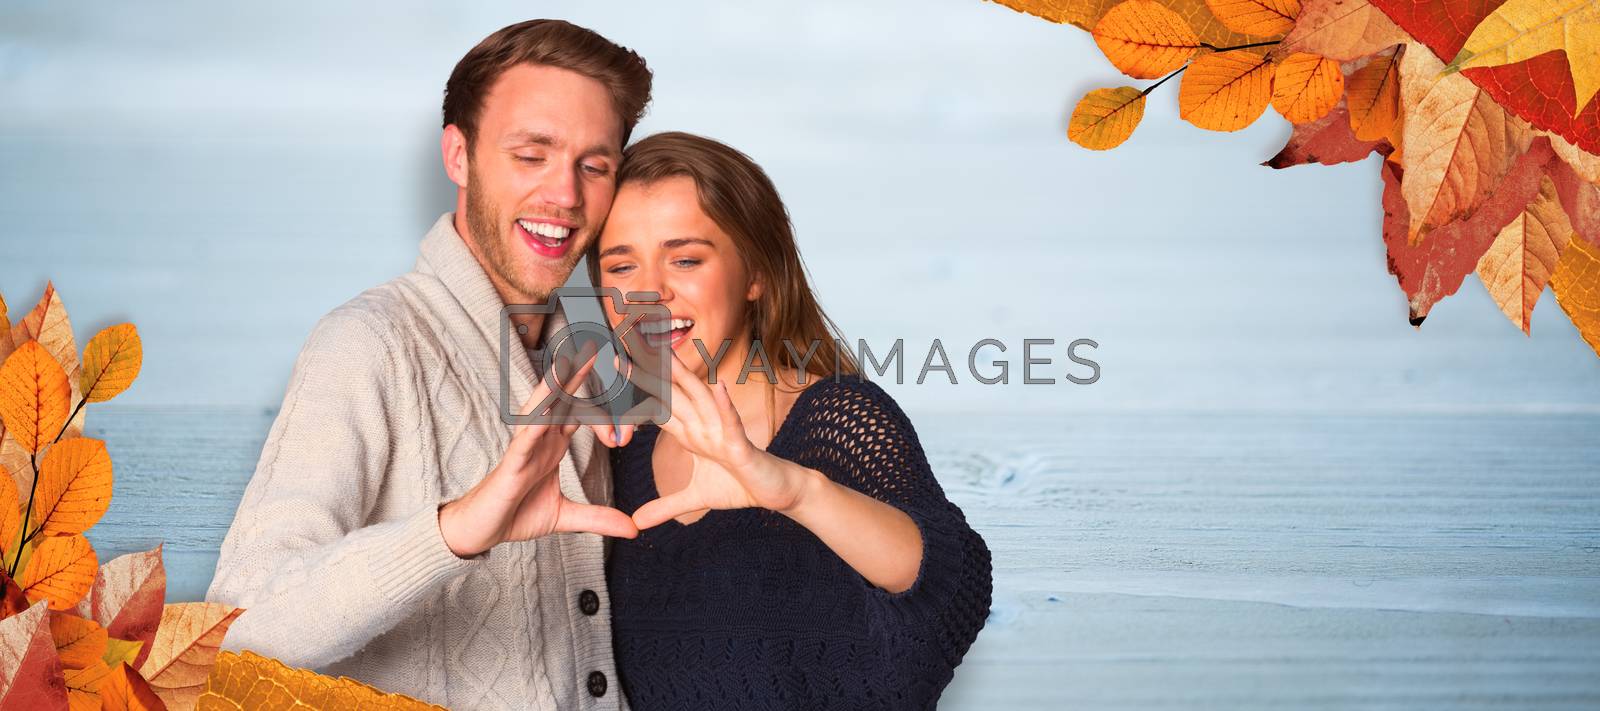 Royalty free image of Composite image of happy couple forming heart with hands by Wavebreakmedia